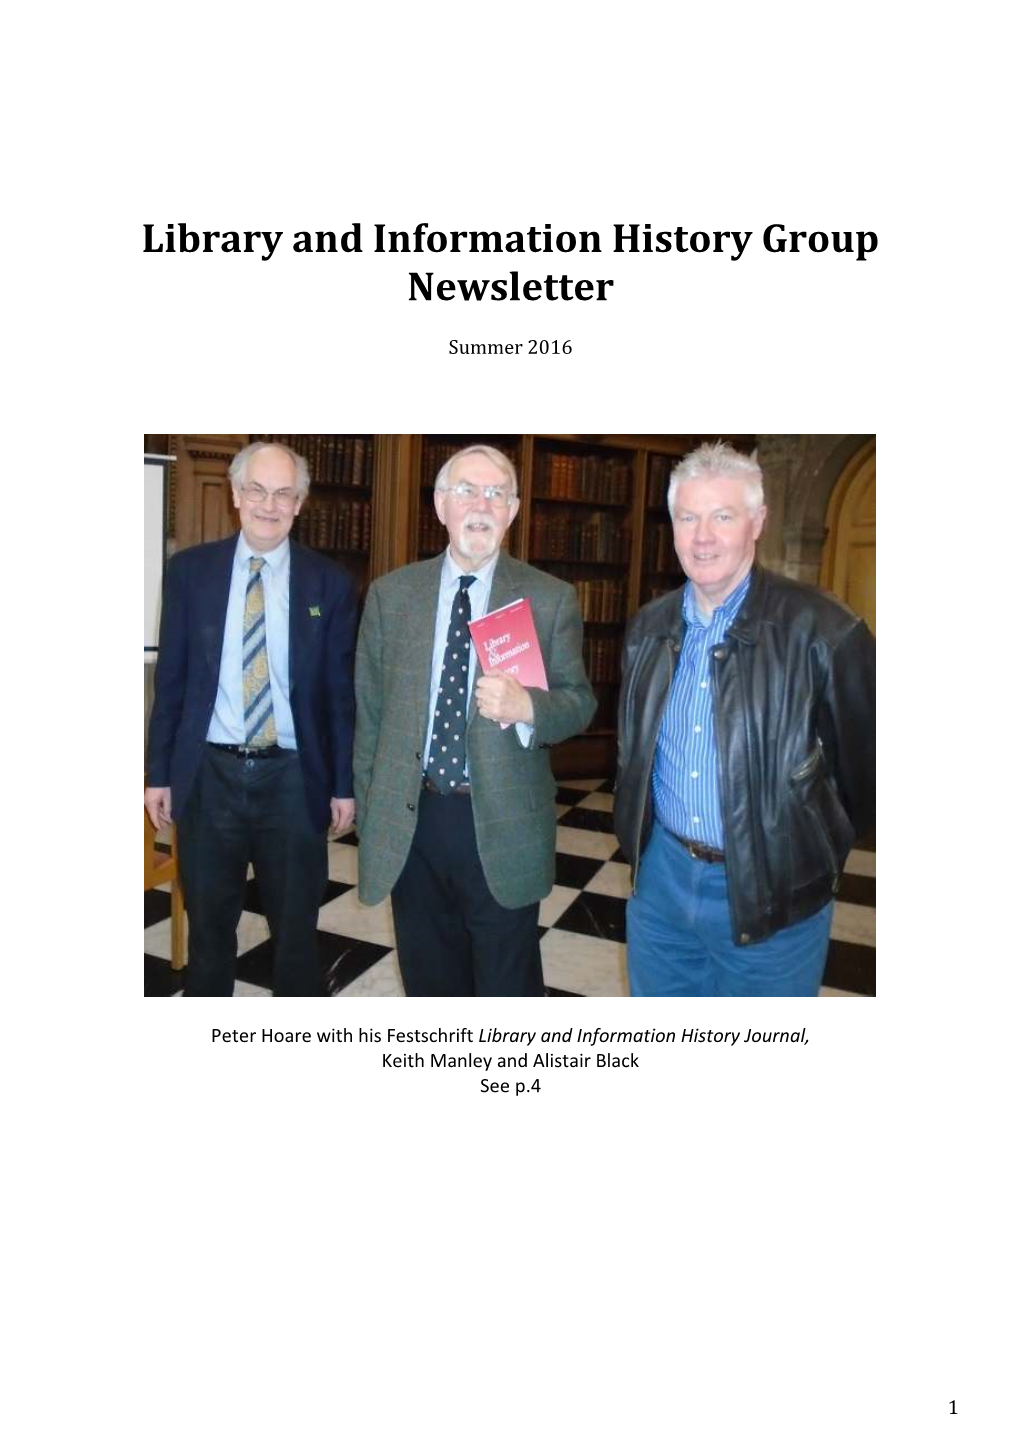 Library and Information History Group Newsletter